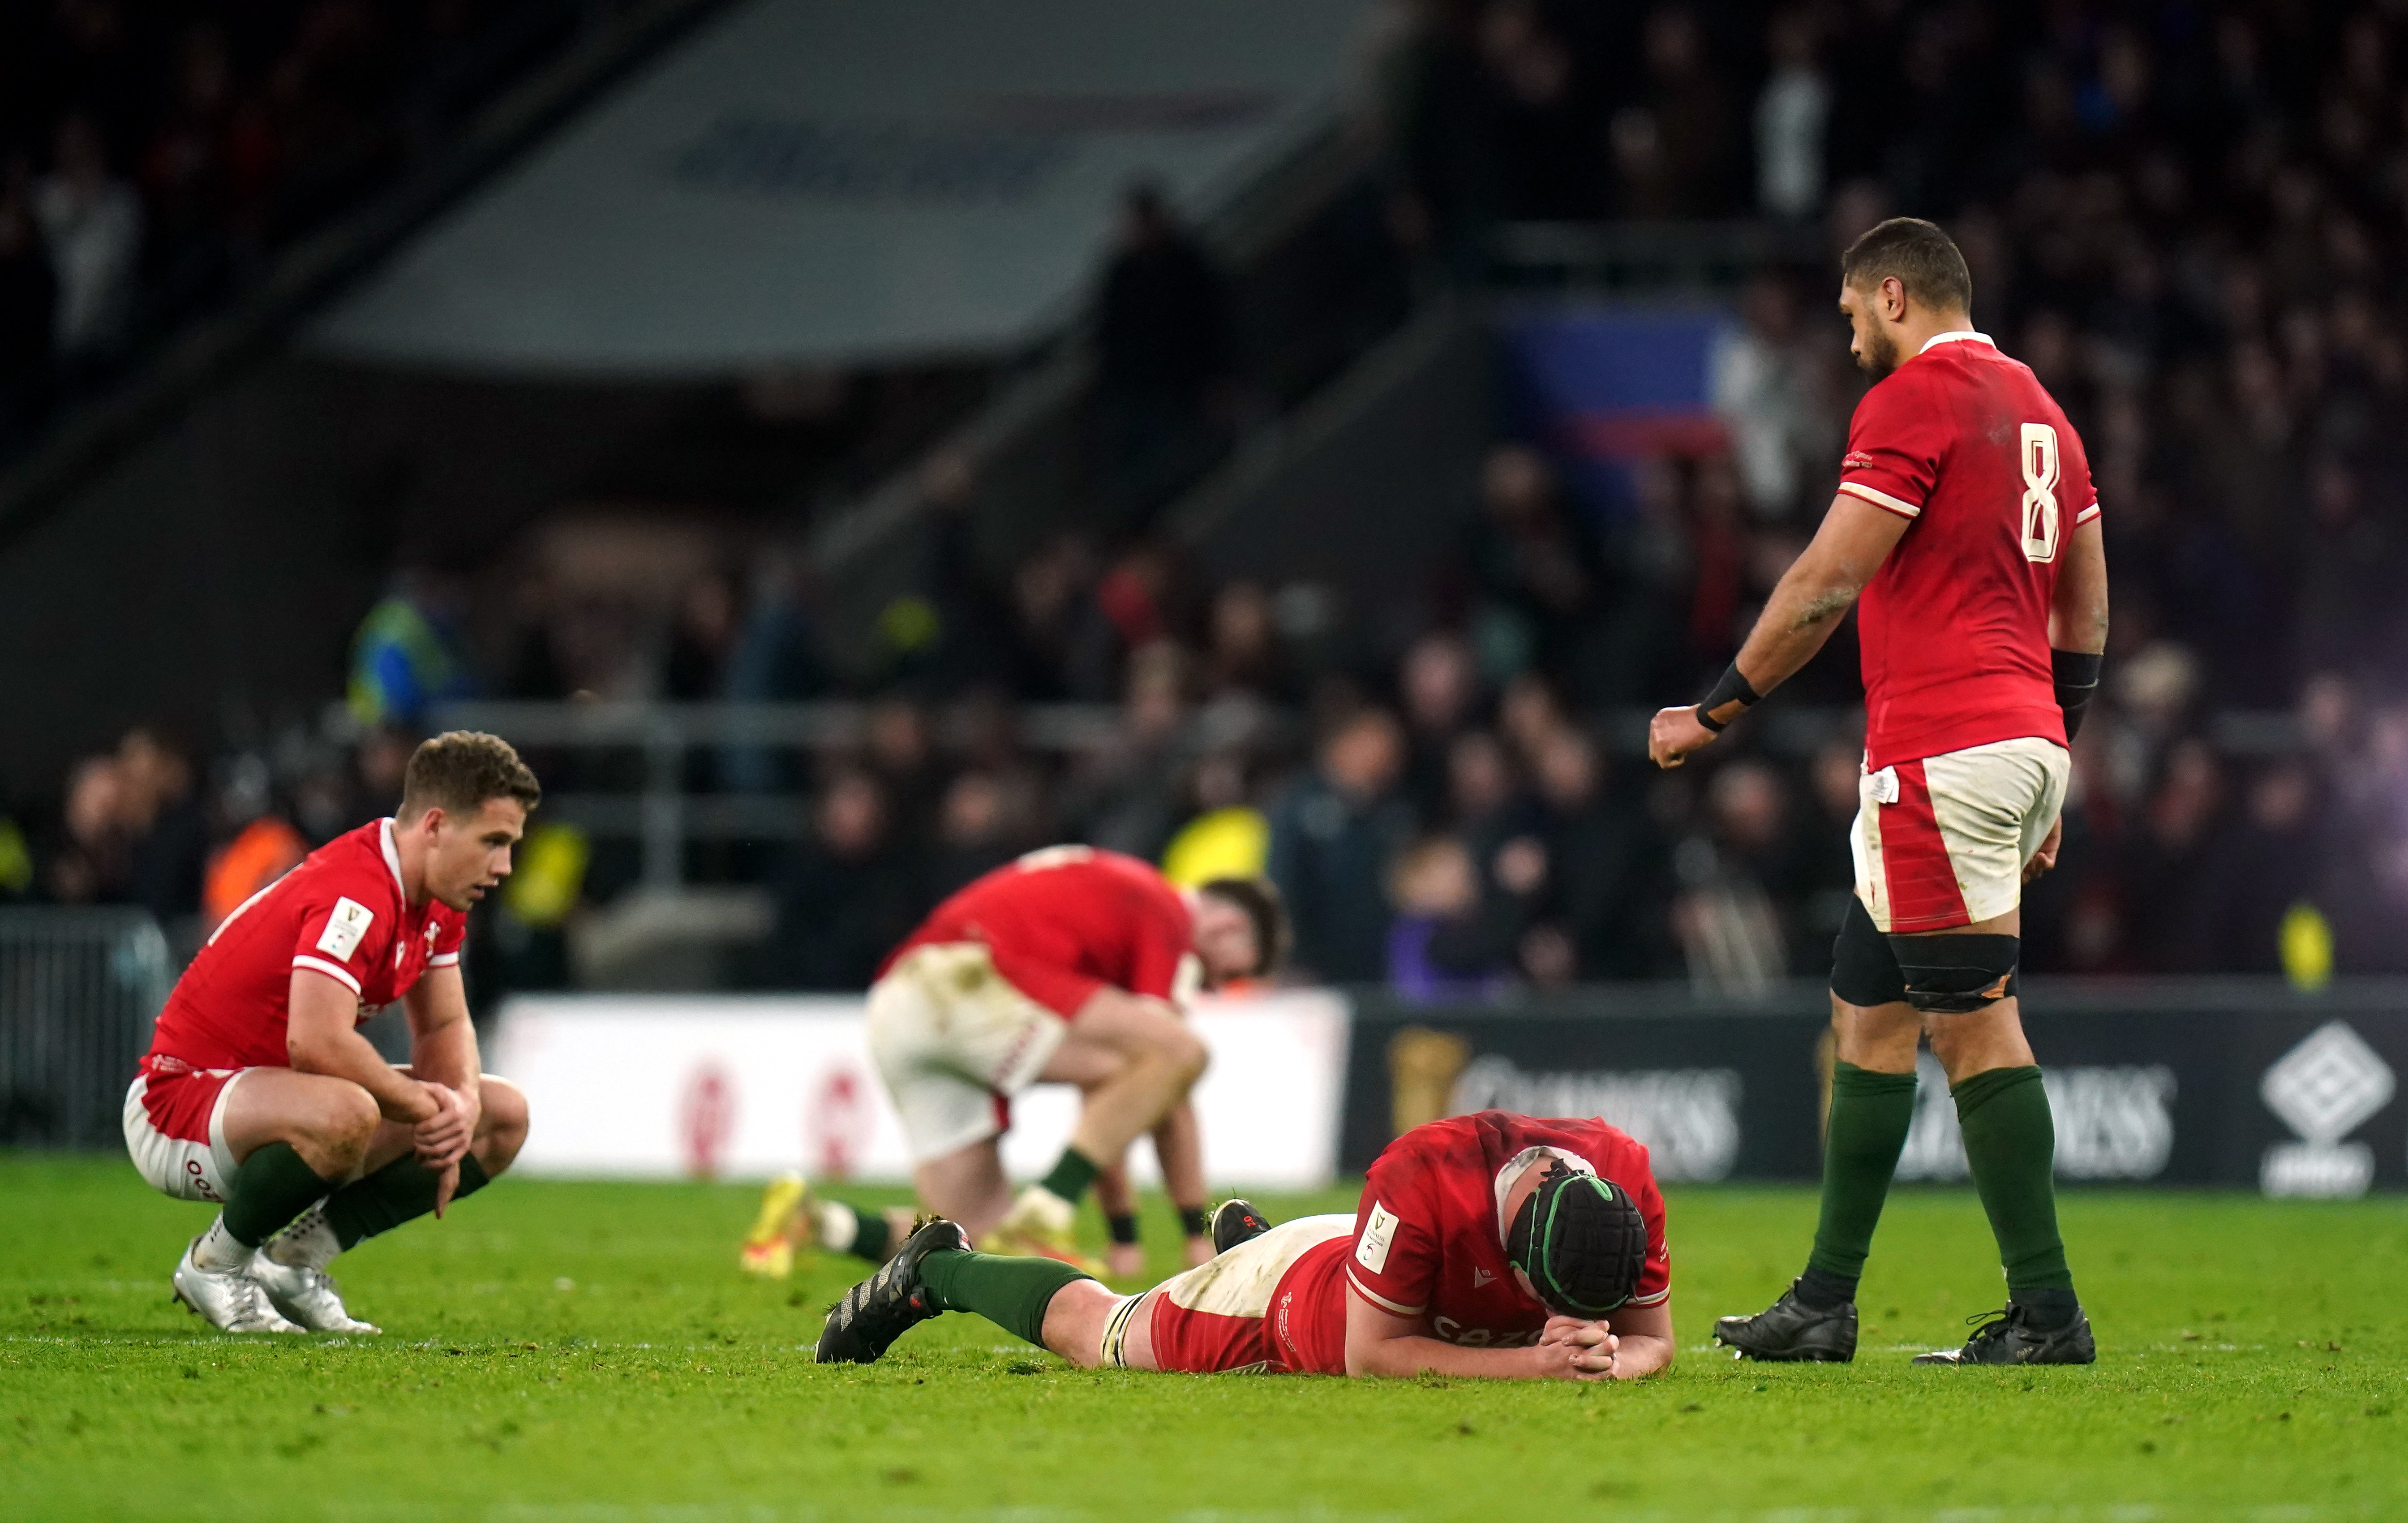 Dejected Wales players after the final whistle at Twickenham (PA)